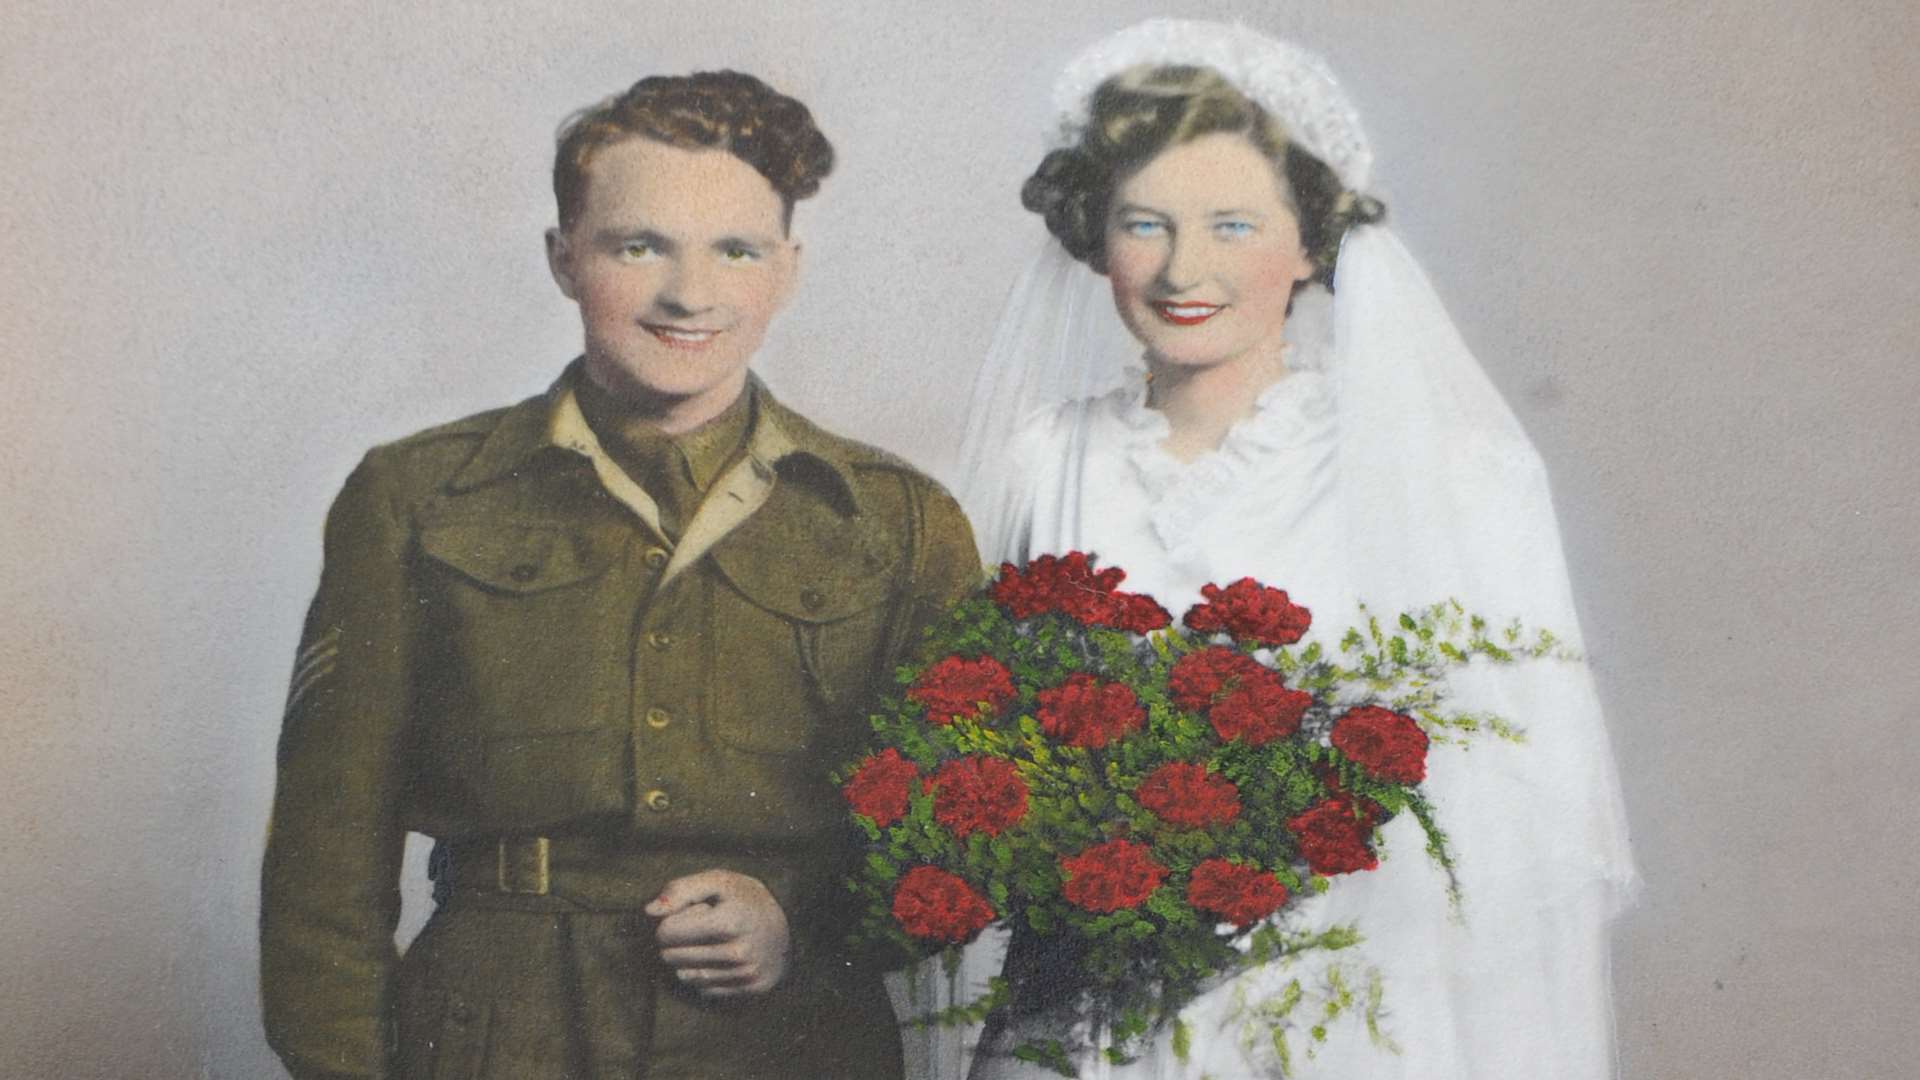 Les and Iris Bewley on their wedding day 70 years ago